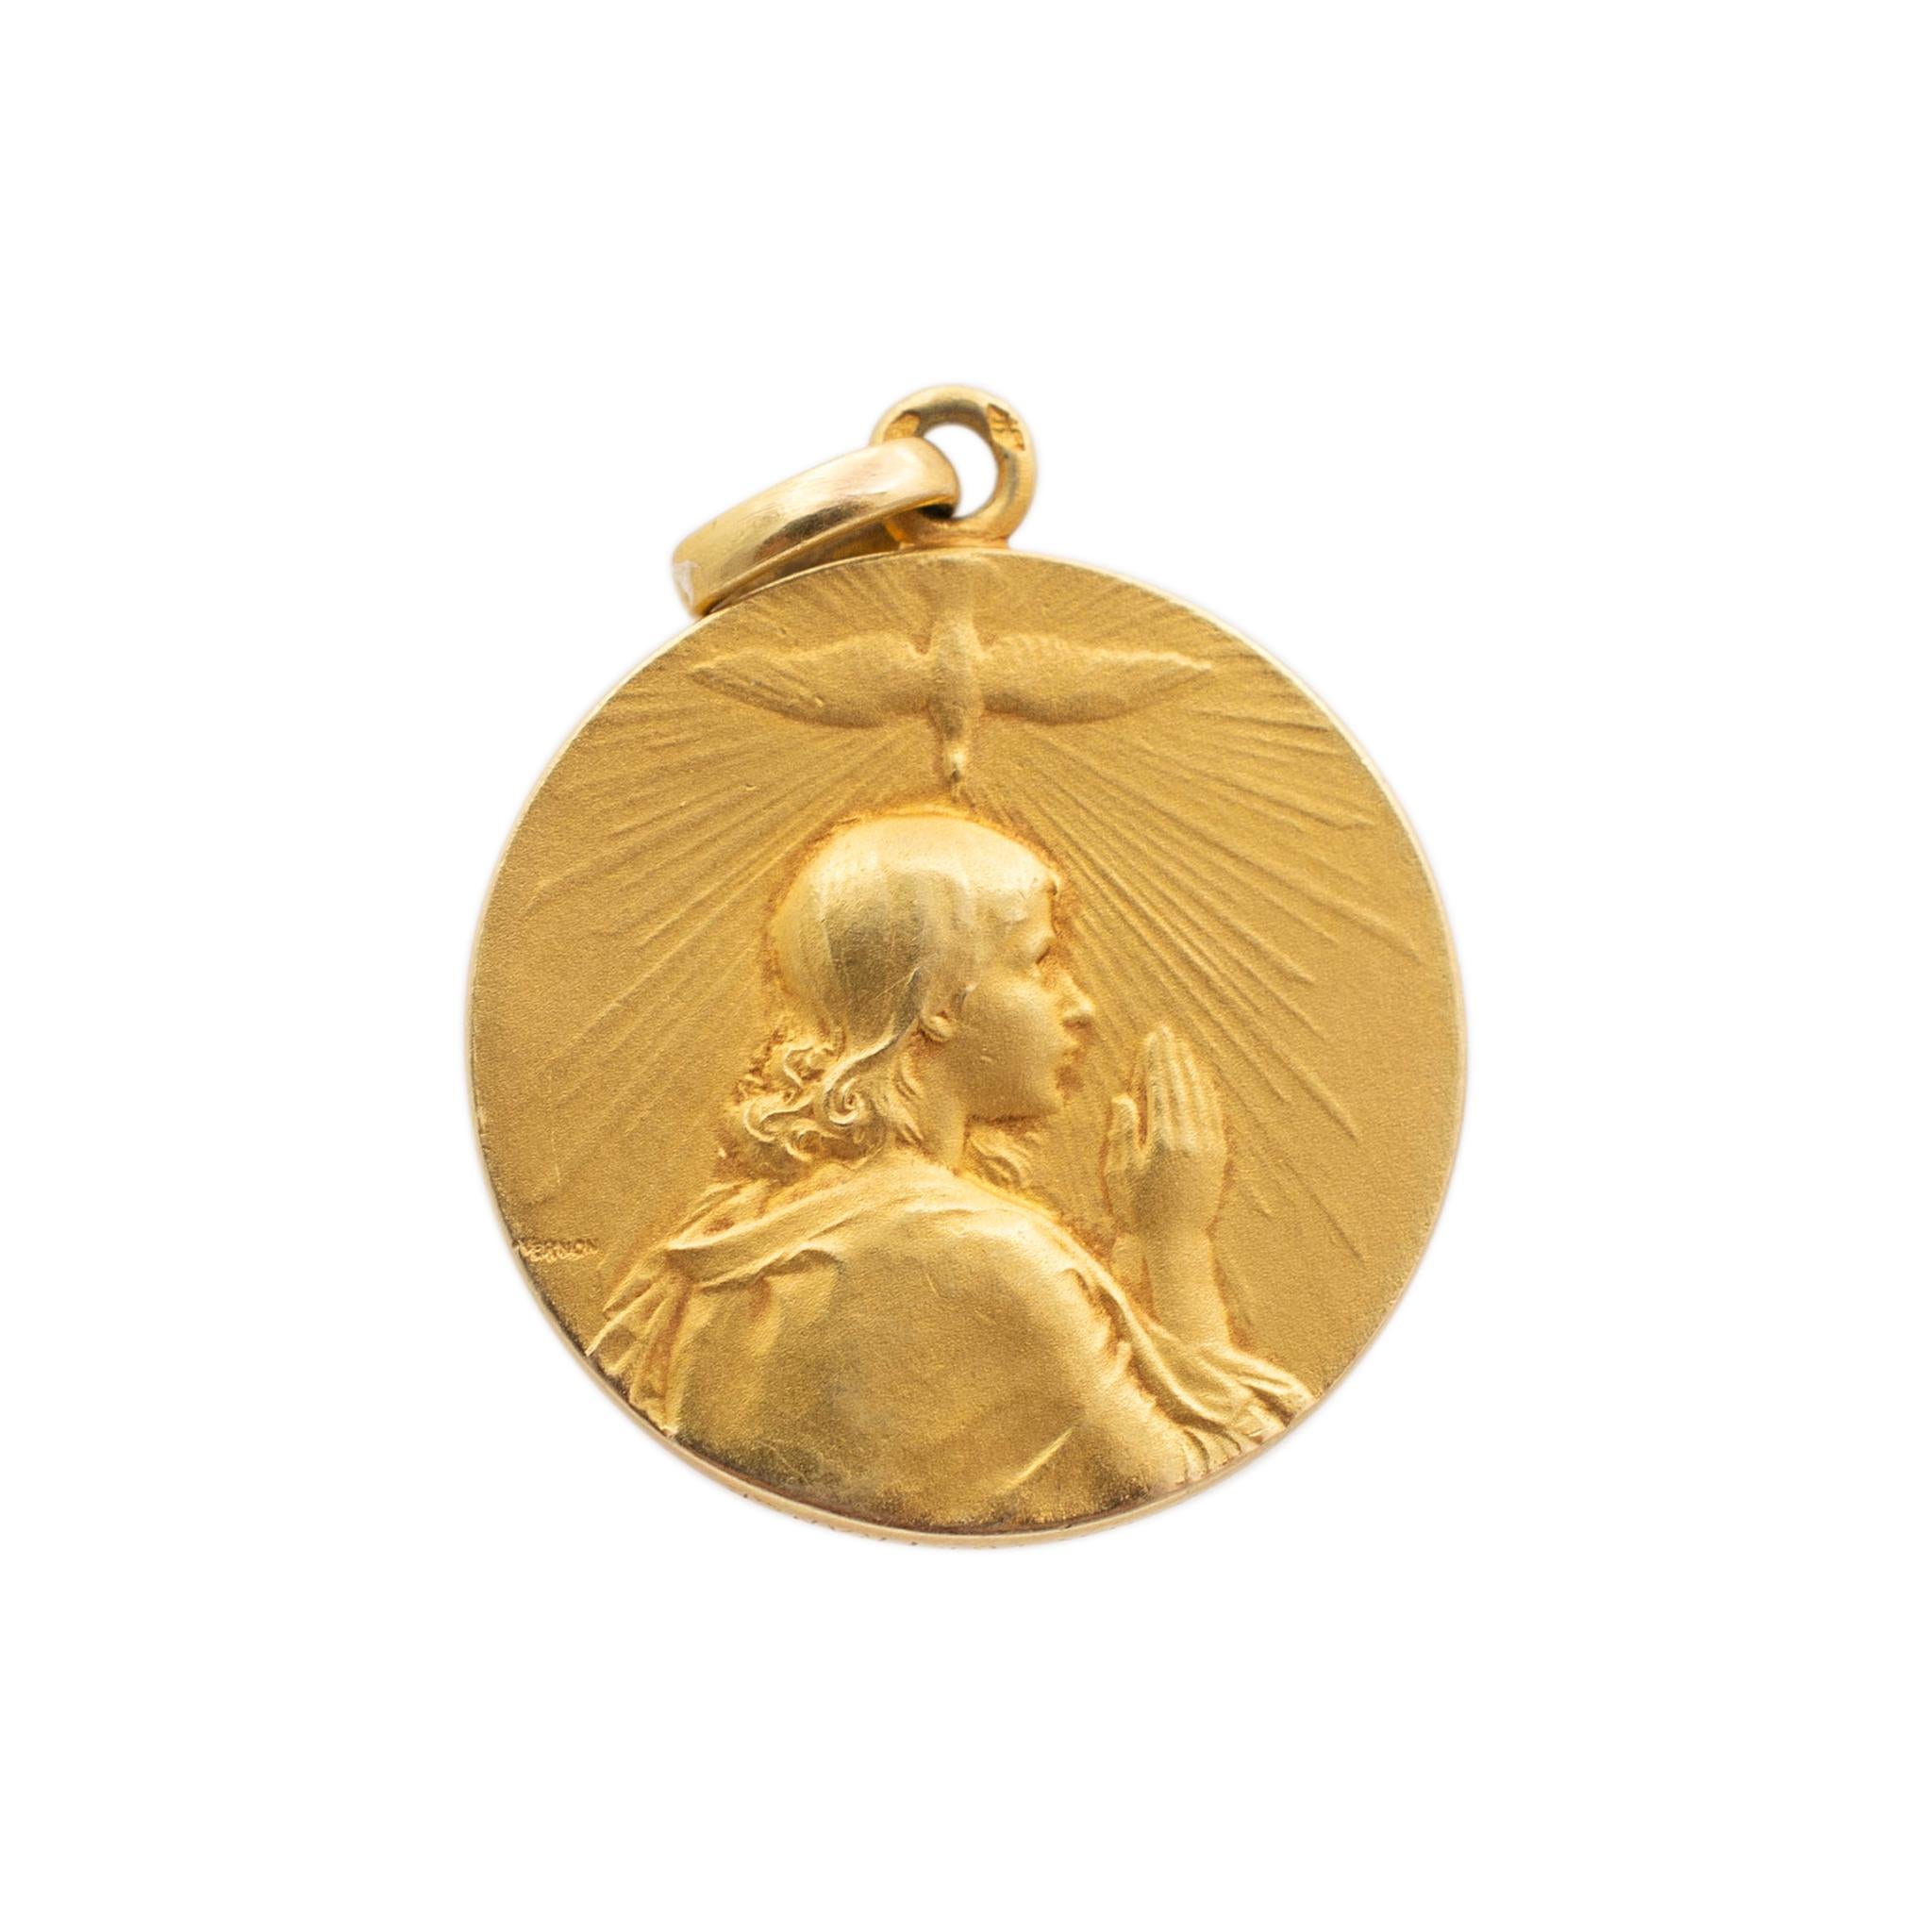 Brand: Cartier

Metal Type: 18K Yellow Gold

Thickness: 2.00 mm

Diameter: 22.80 mm

Weight: 10.25 grams

18K yellow gold religious, Edwardian (1901-1920) medallion pendant. The metal was tested and determined to be 18K yellow gold. Engraved with